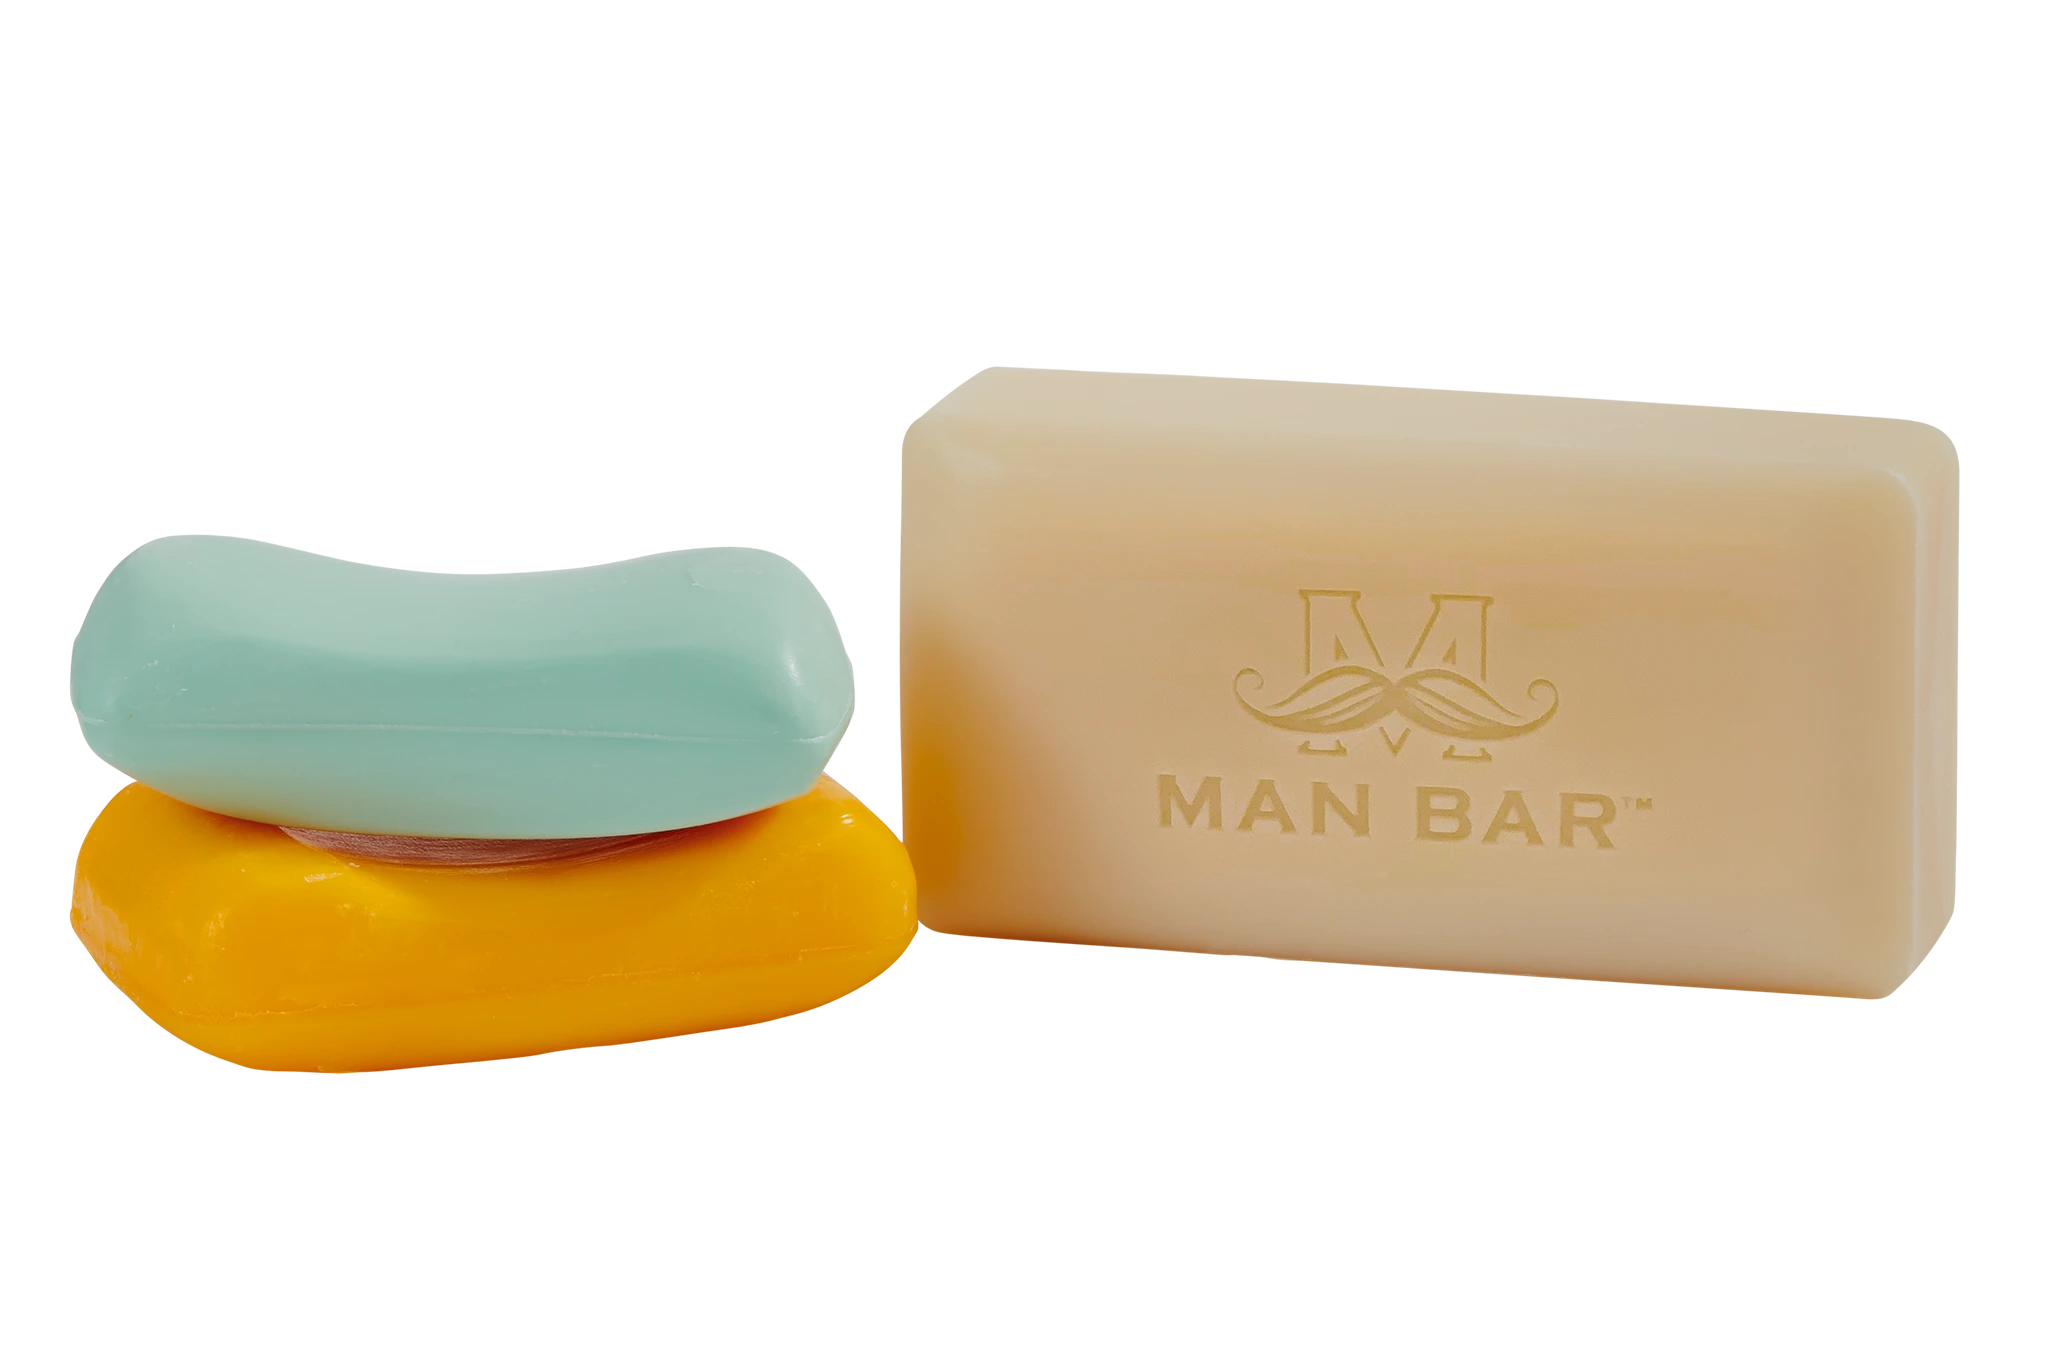 Large Man Bar soap compared next to two different much smaller grocery-brand soaps